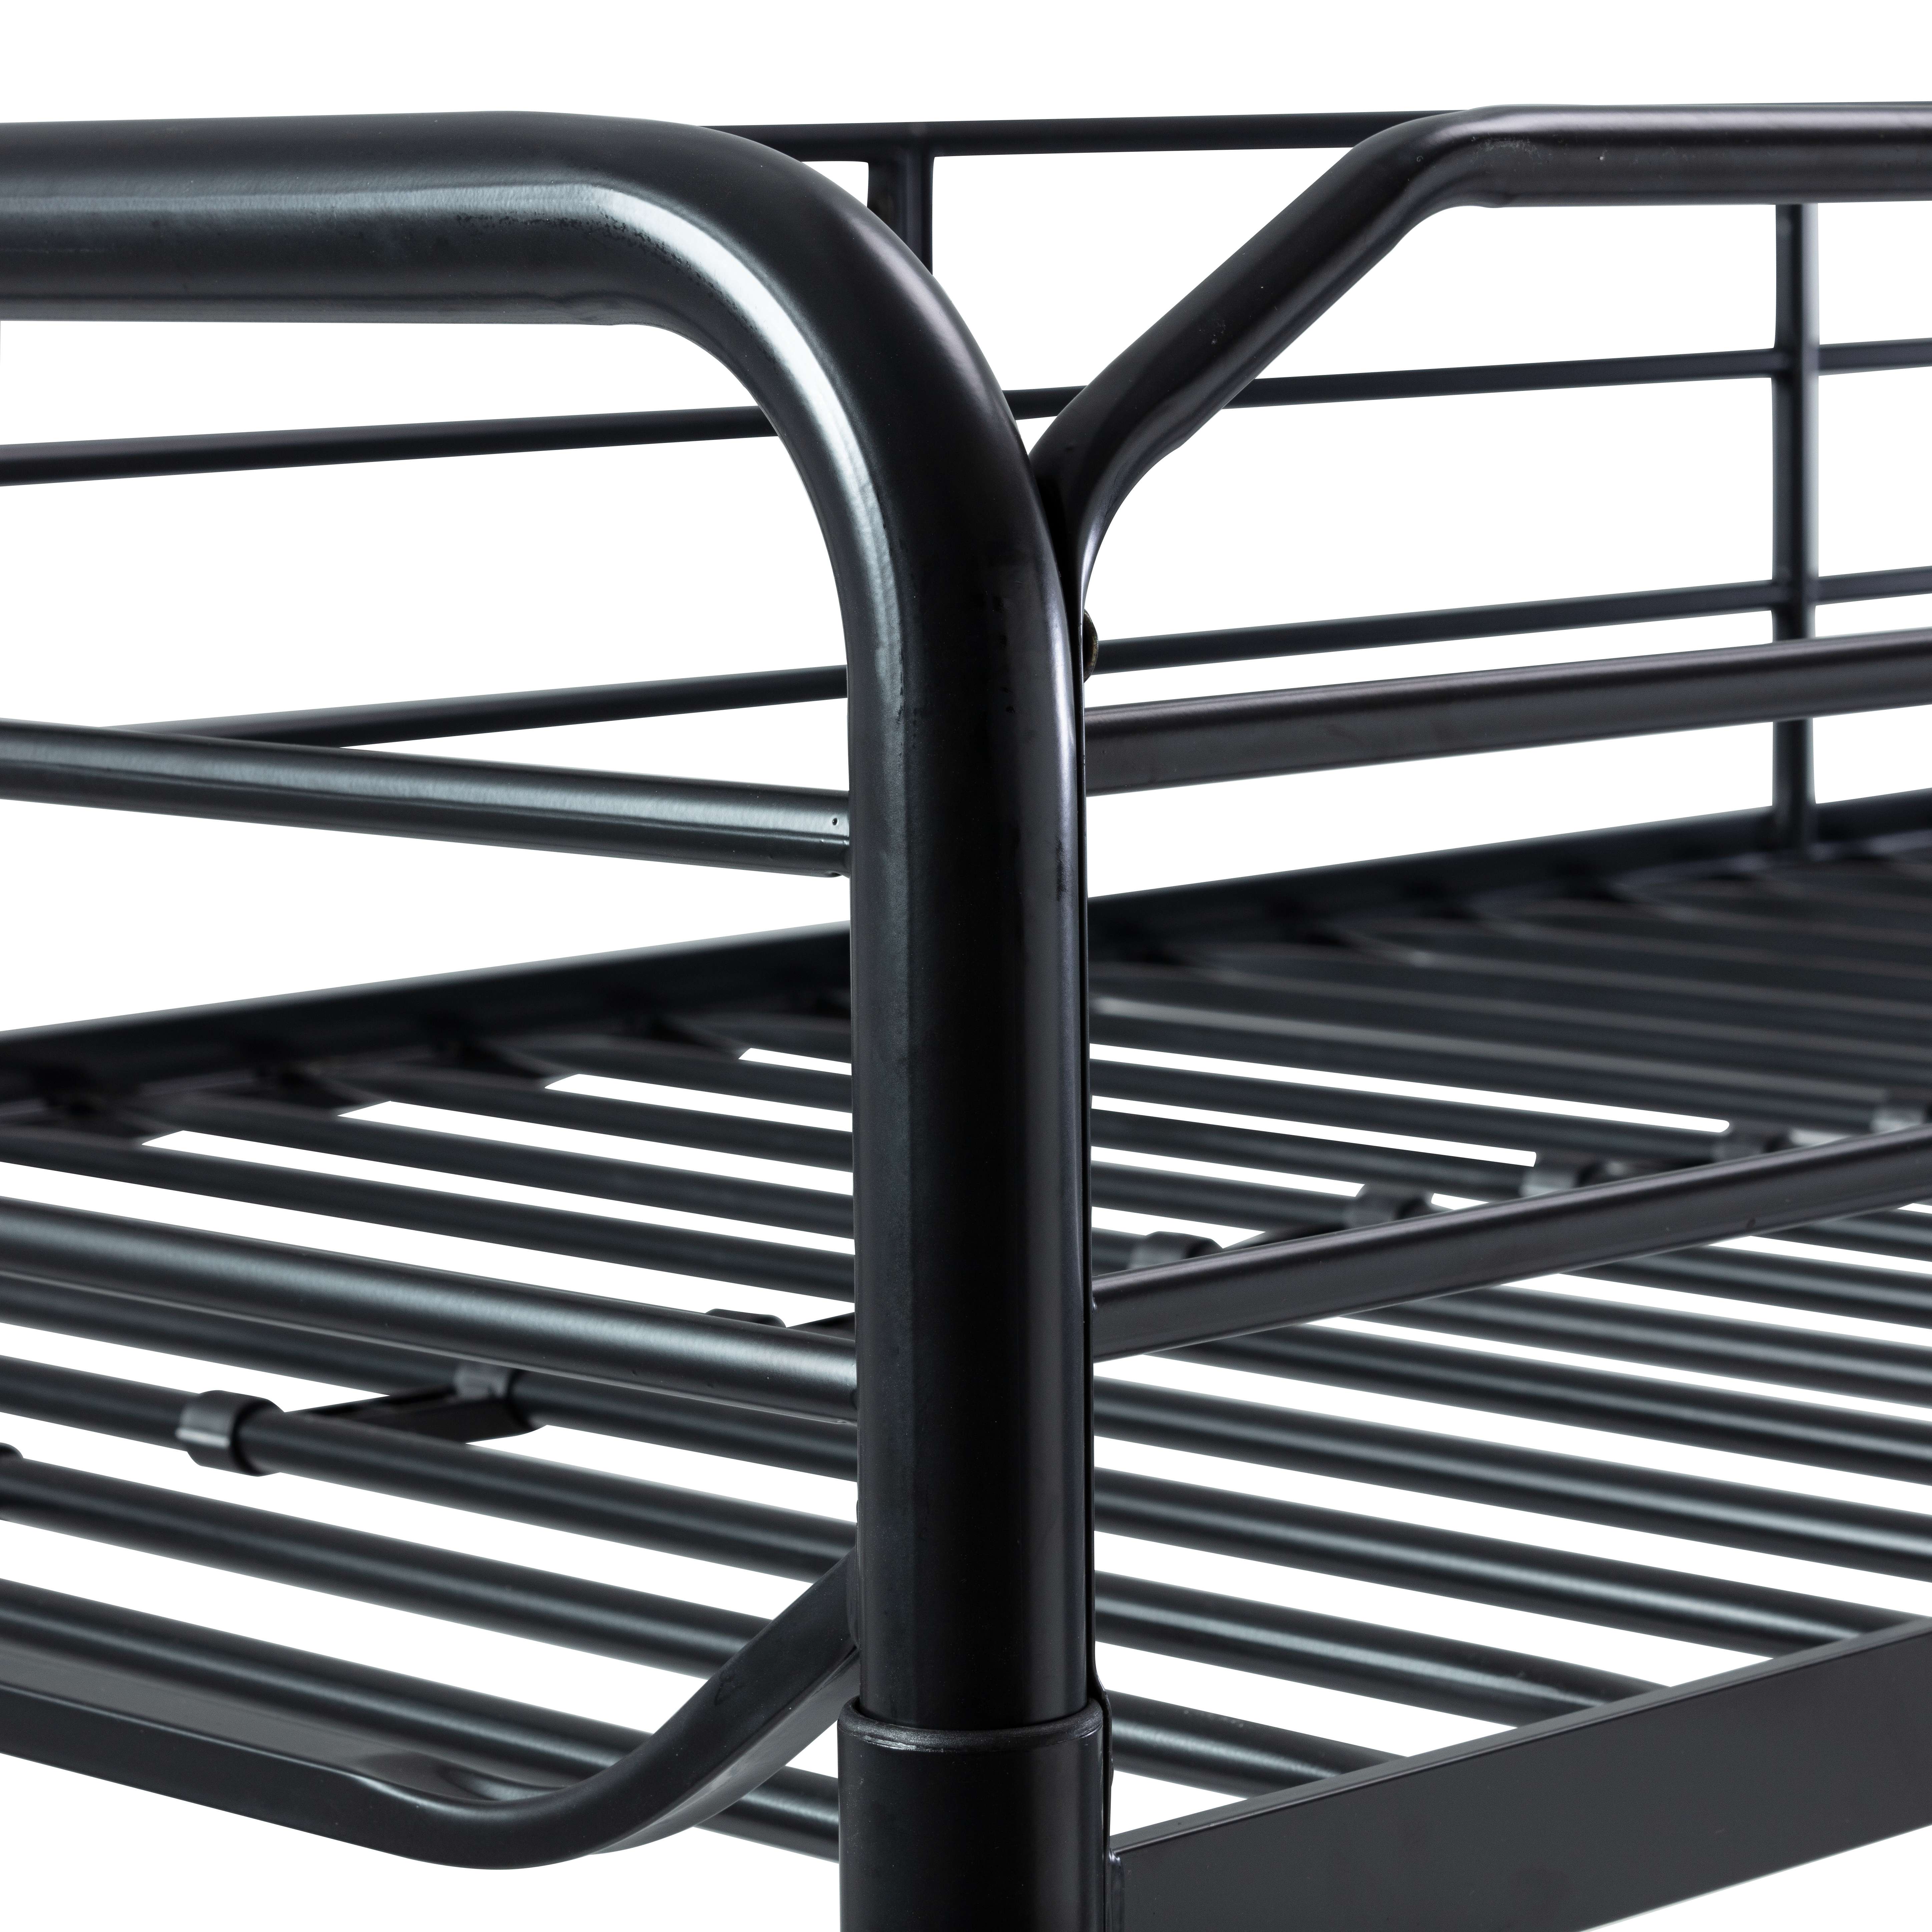 Metal Bunk Bed Twin Over Twin Black